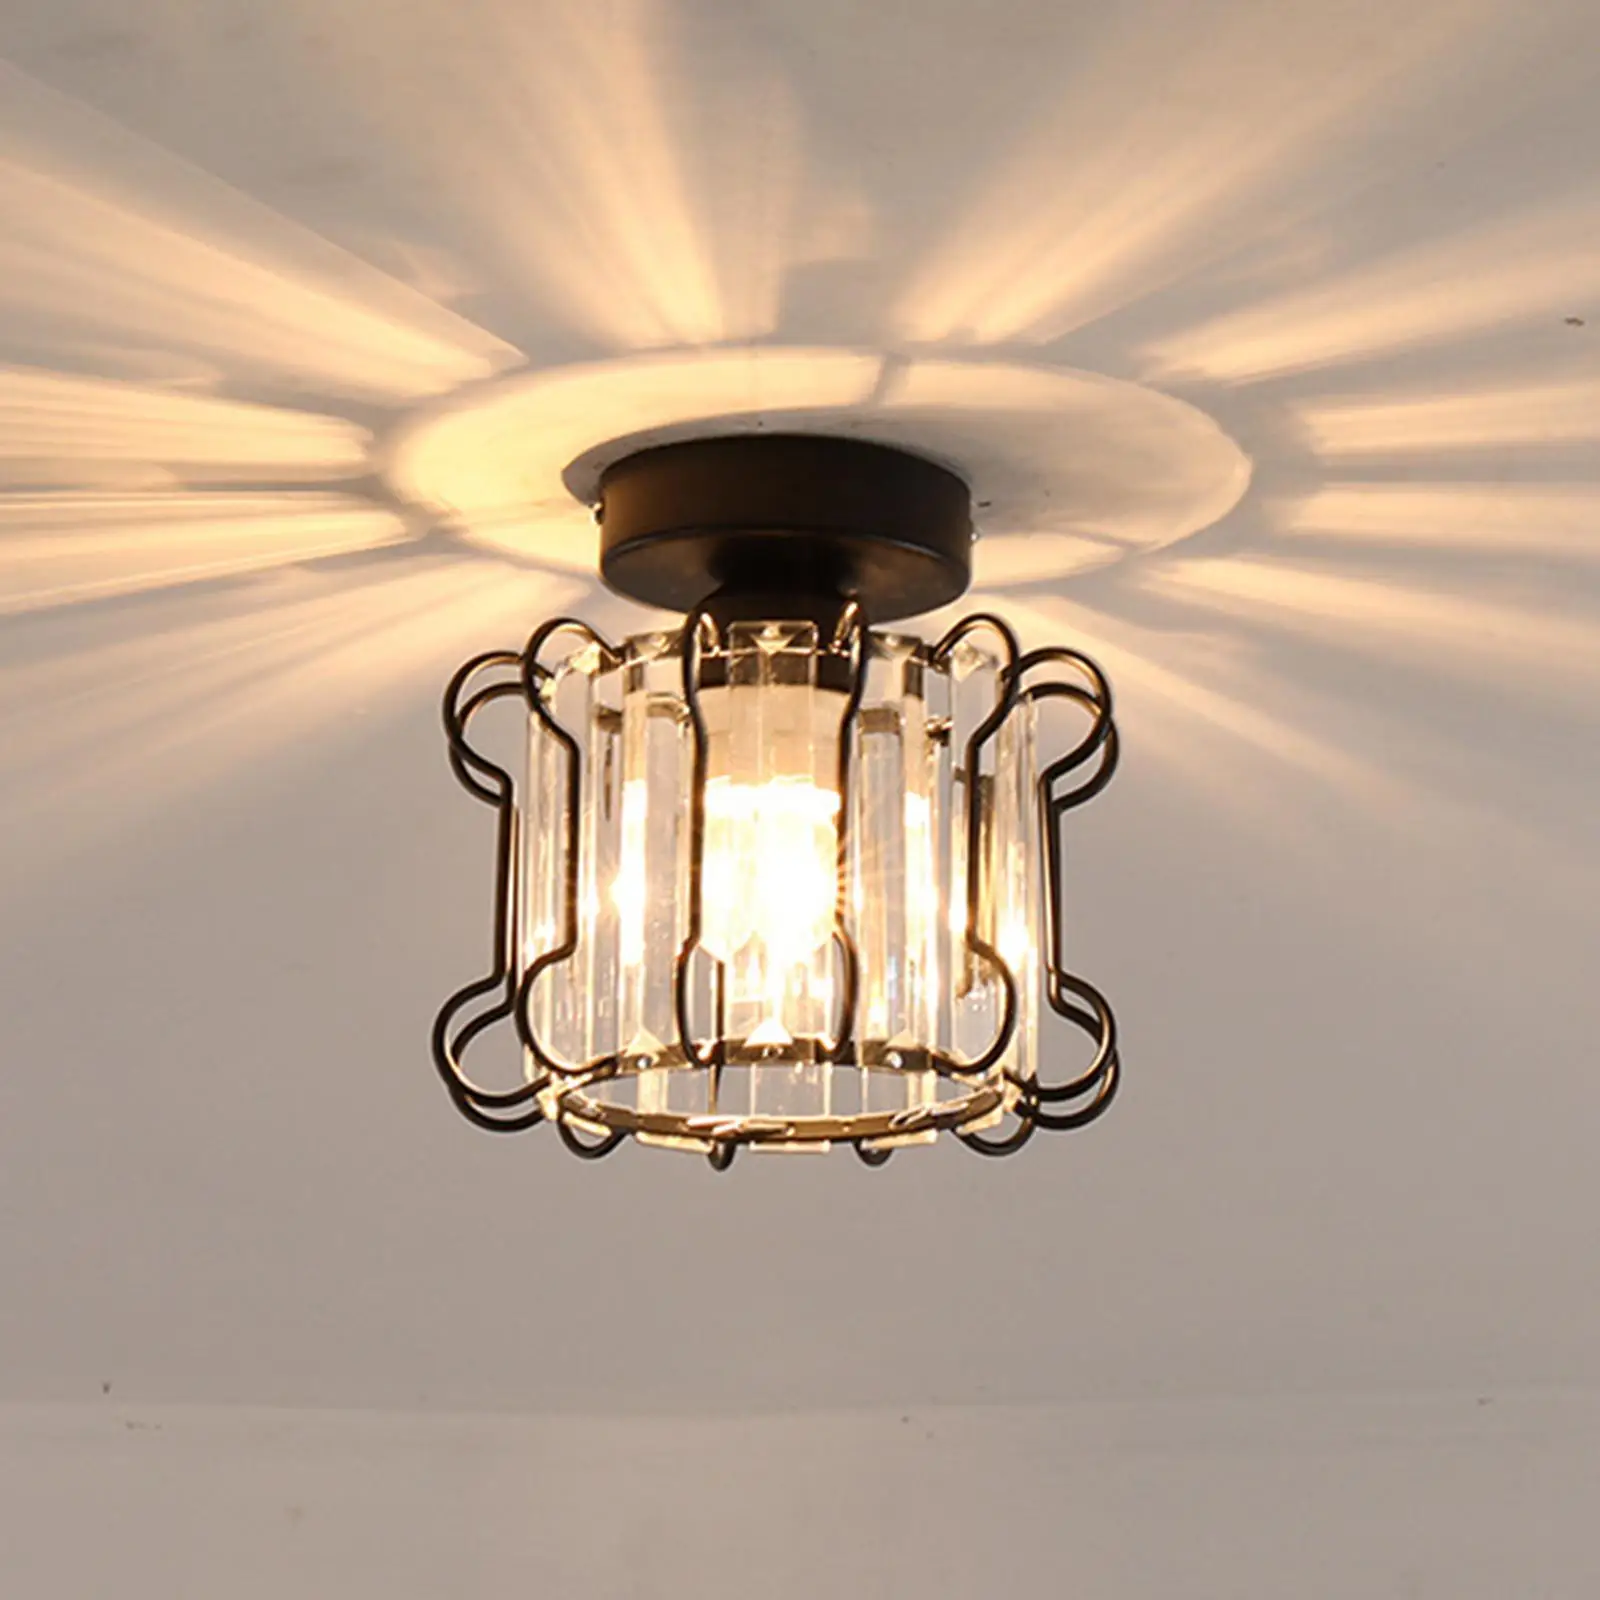 Industrial Crystal Ceiling Light, Metal, Creative Lamp for Aisle Home Decor Home Ligting